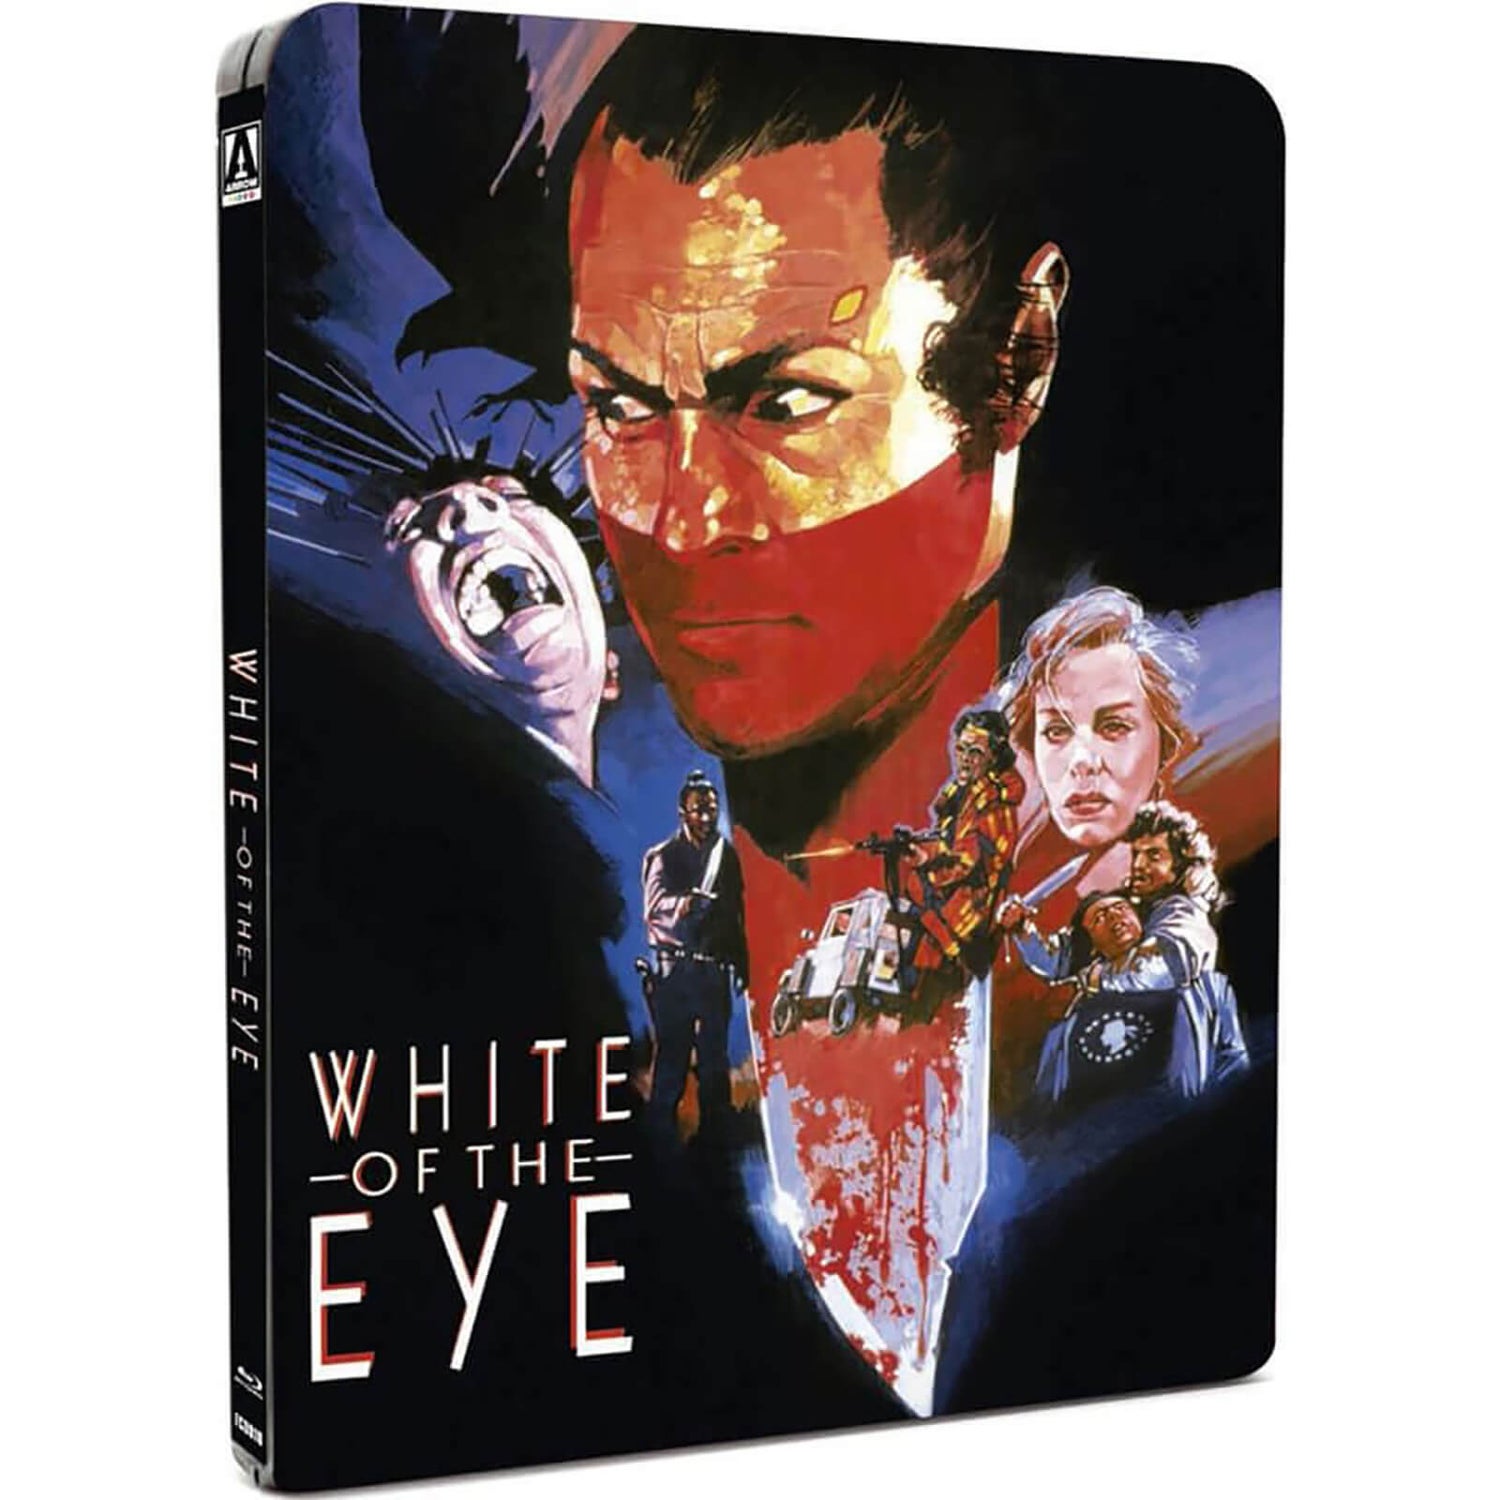 White of the Eye - Limited Edition Steelbook (Dual Format Edition) (UK EDITION)